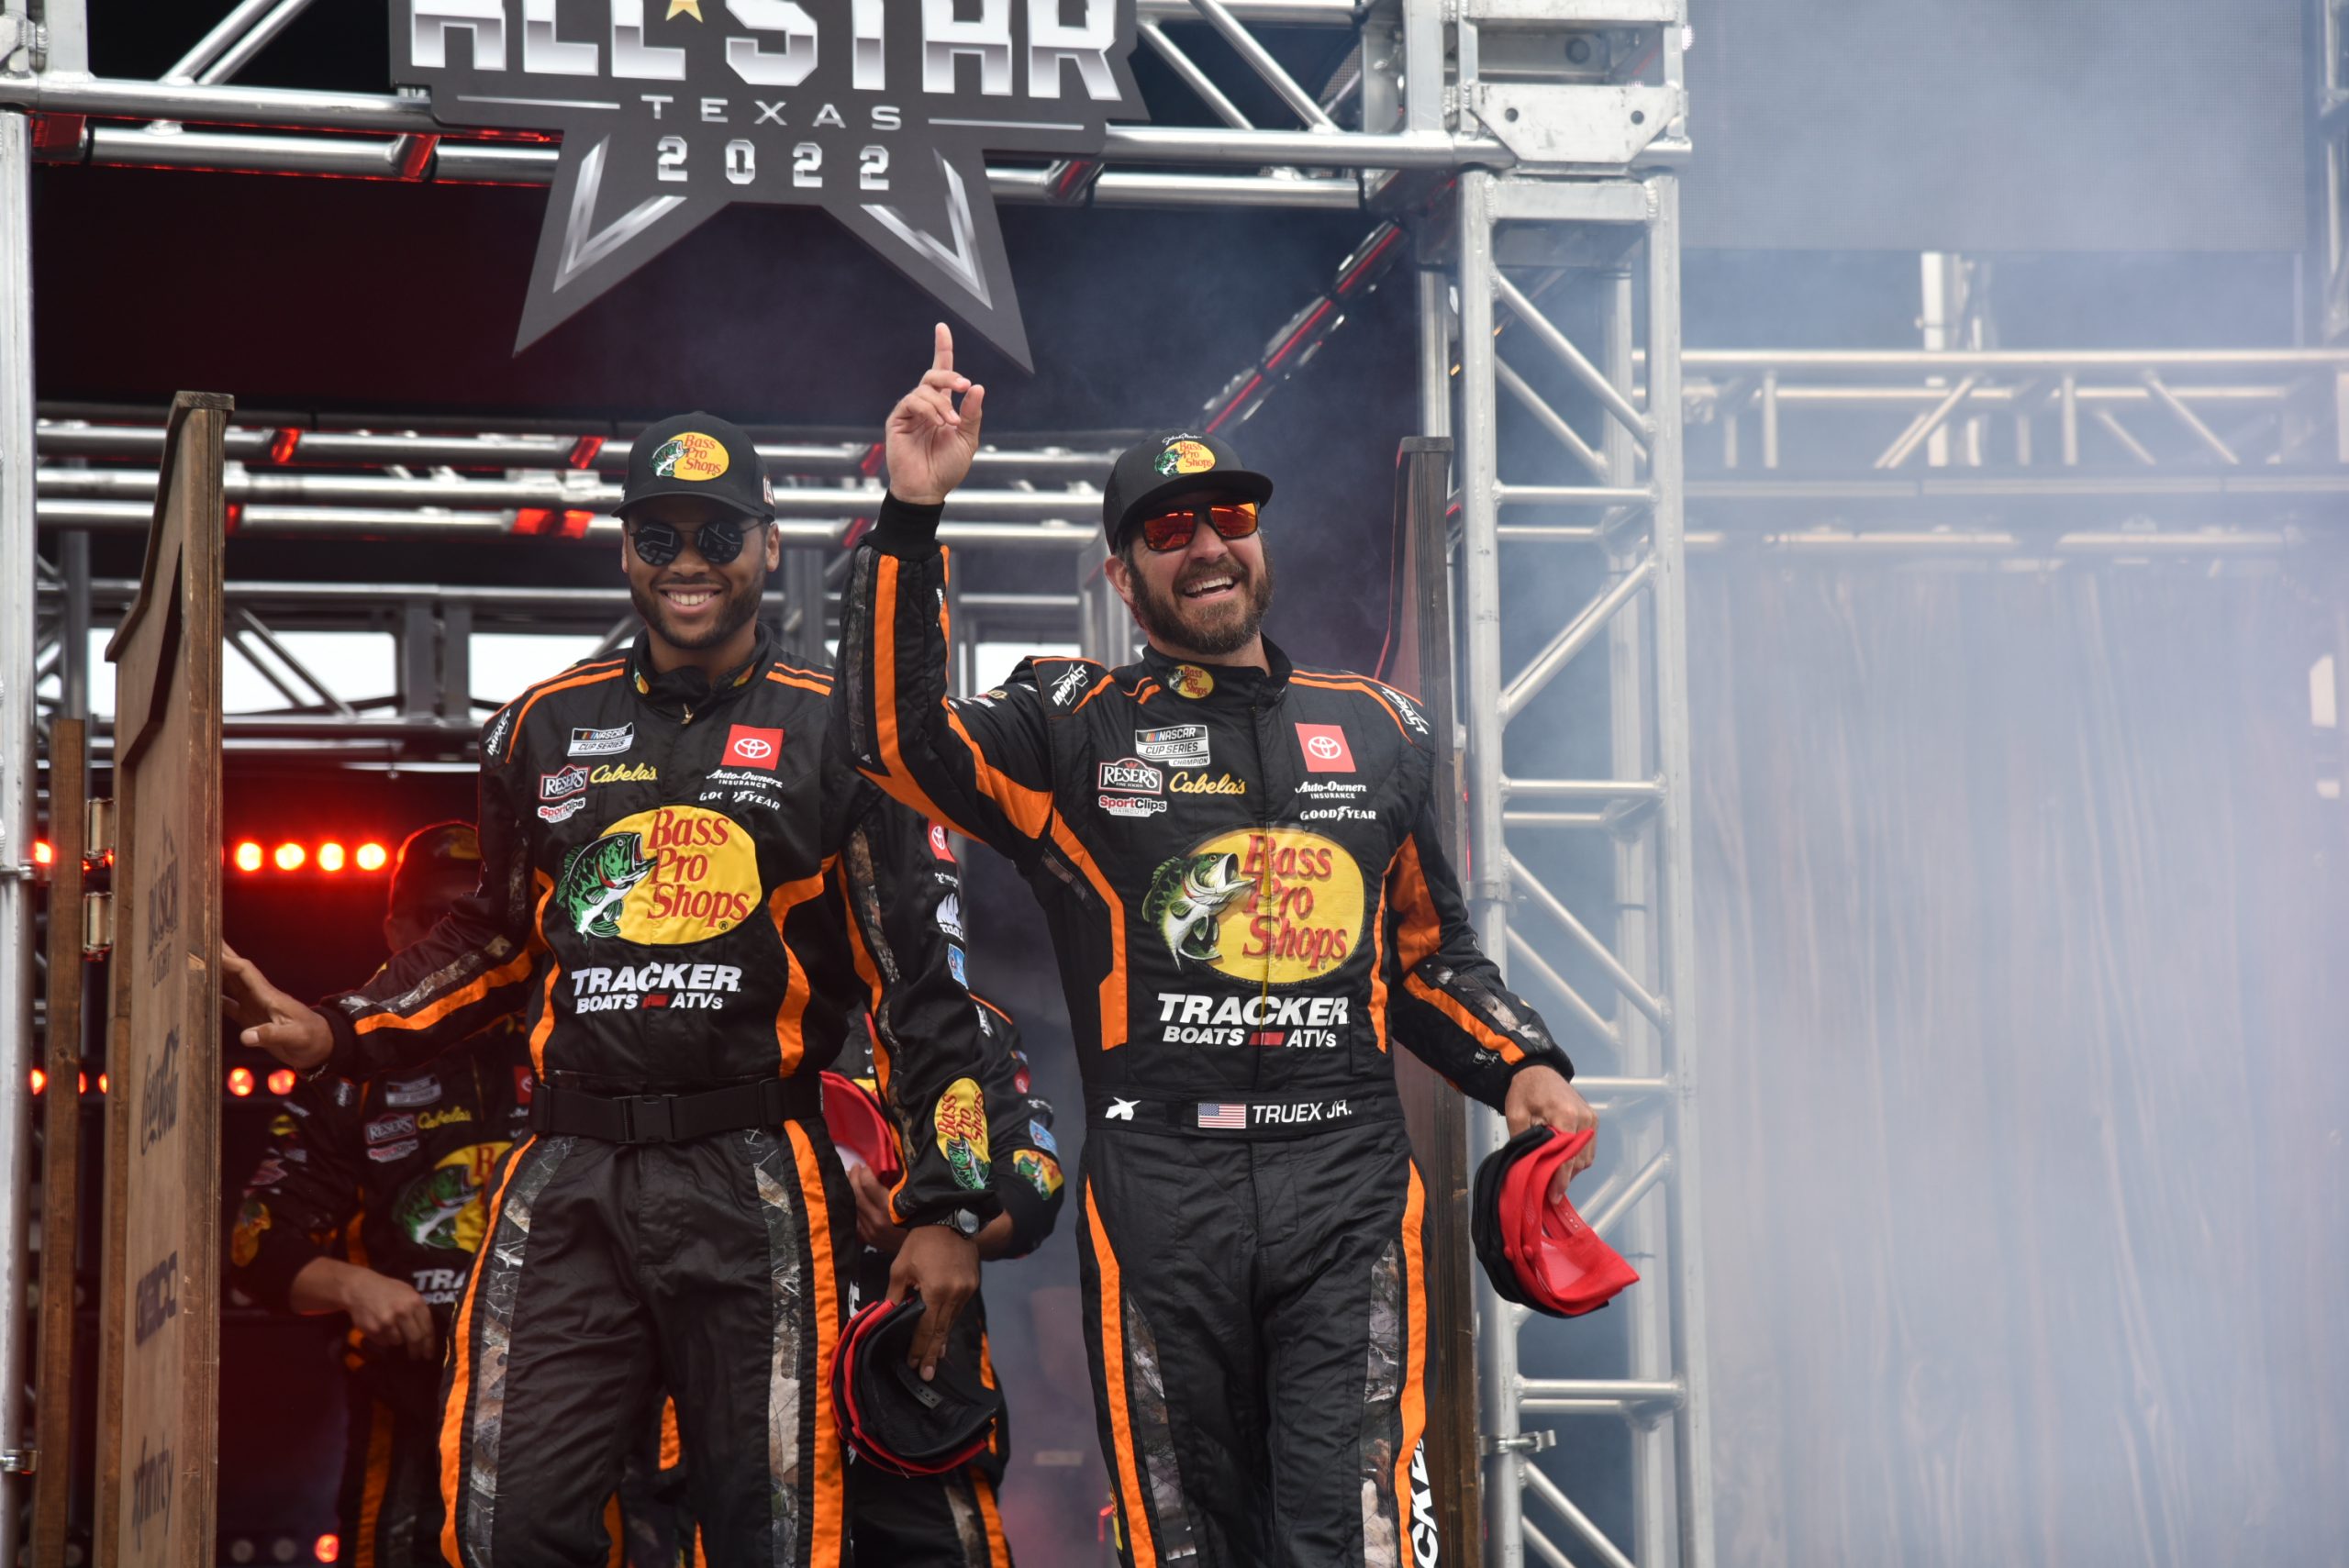 Does this race have the makings of a Martin Truex Jr. victory? (Photo: Luis Torres | The Podium Finish)